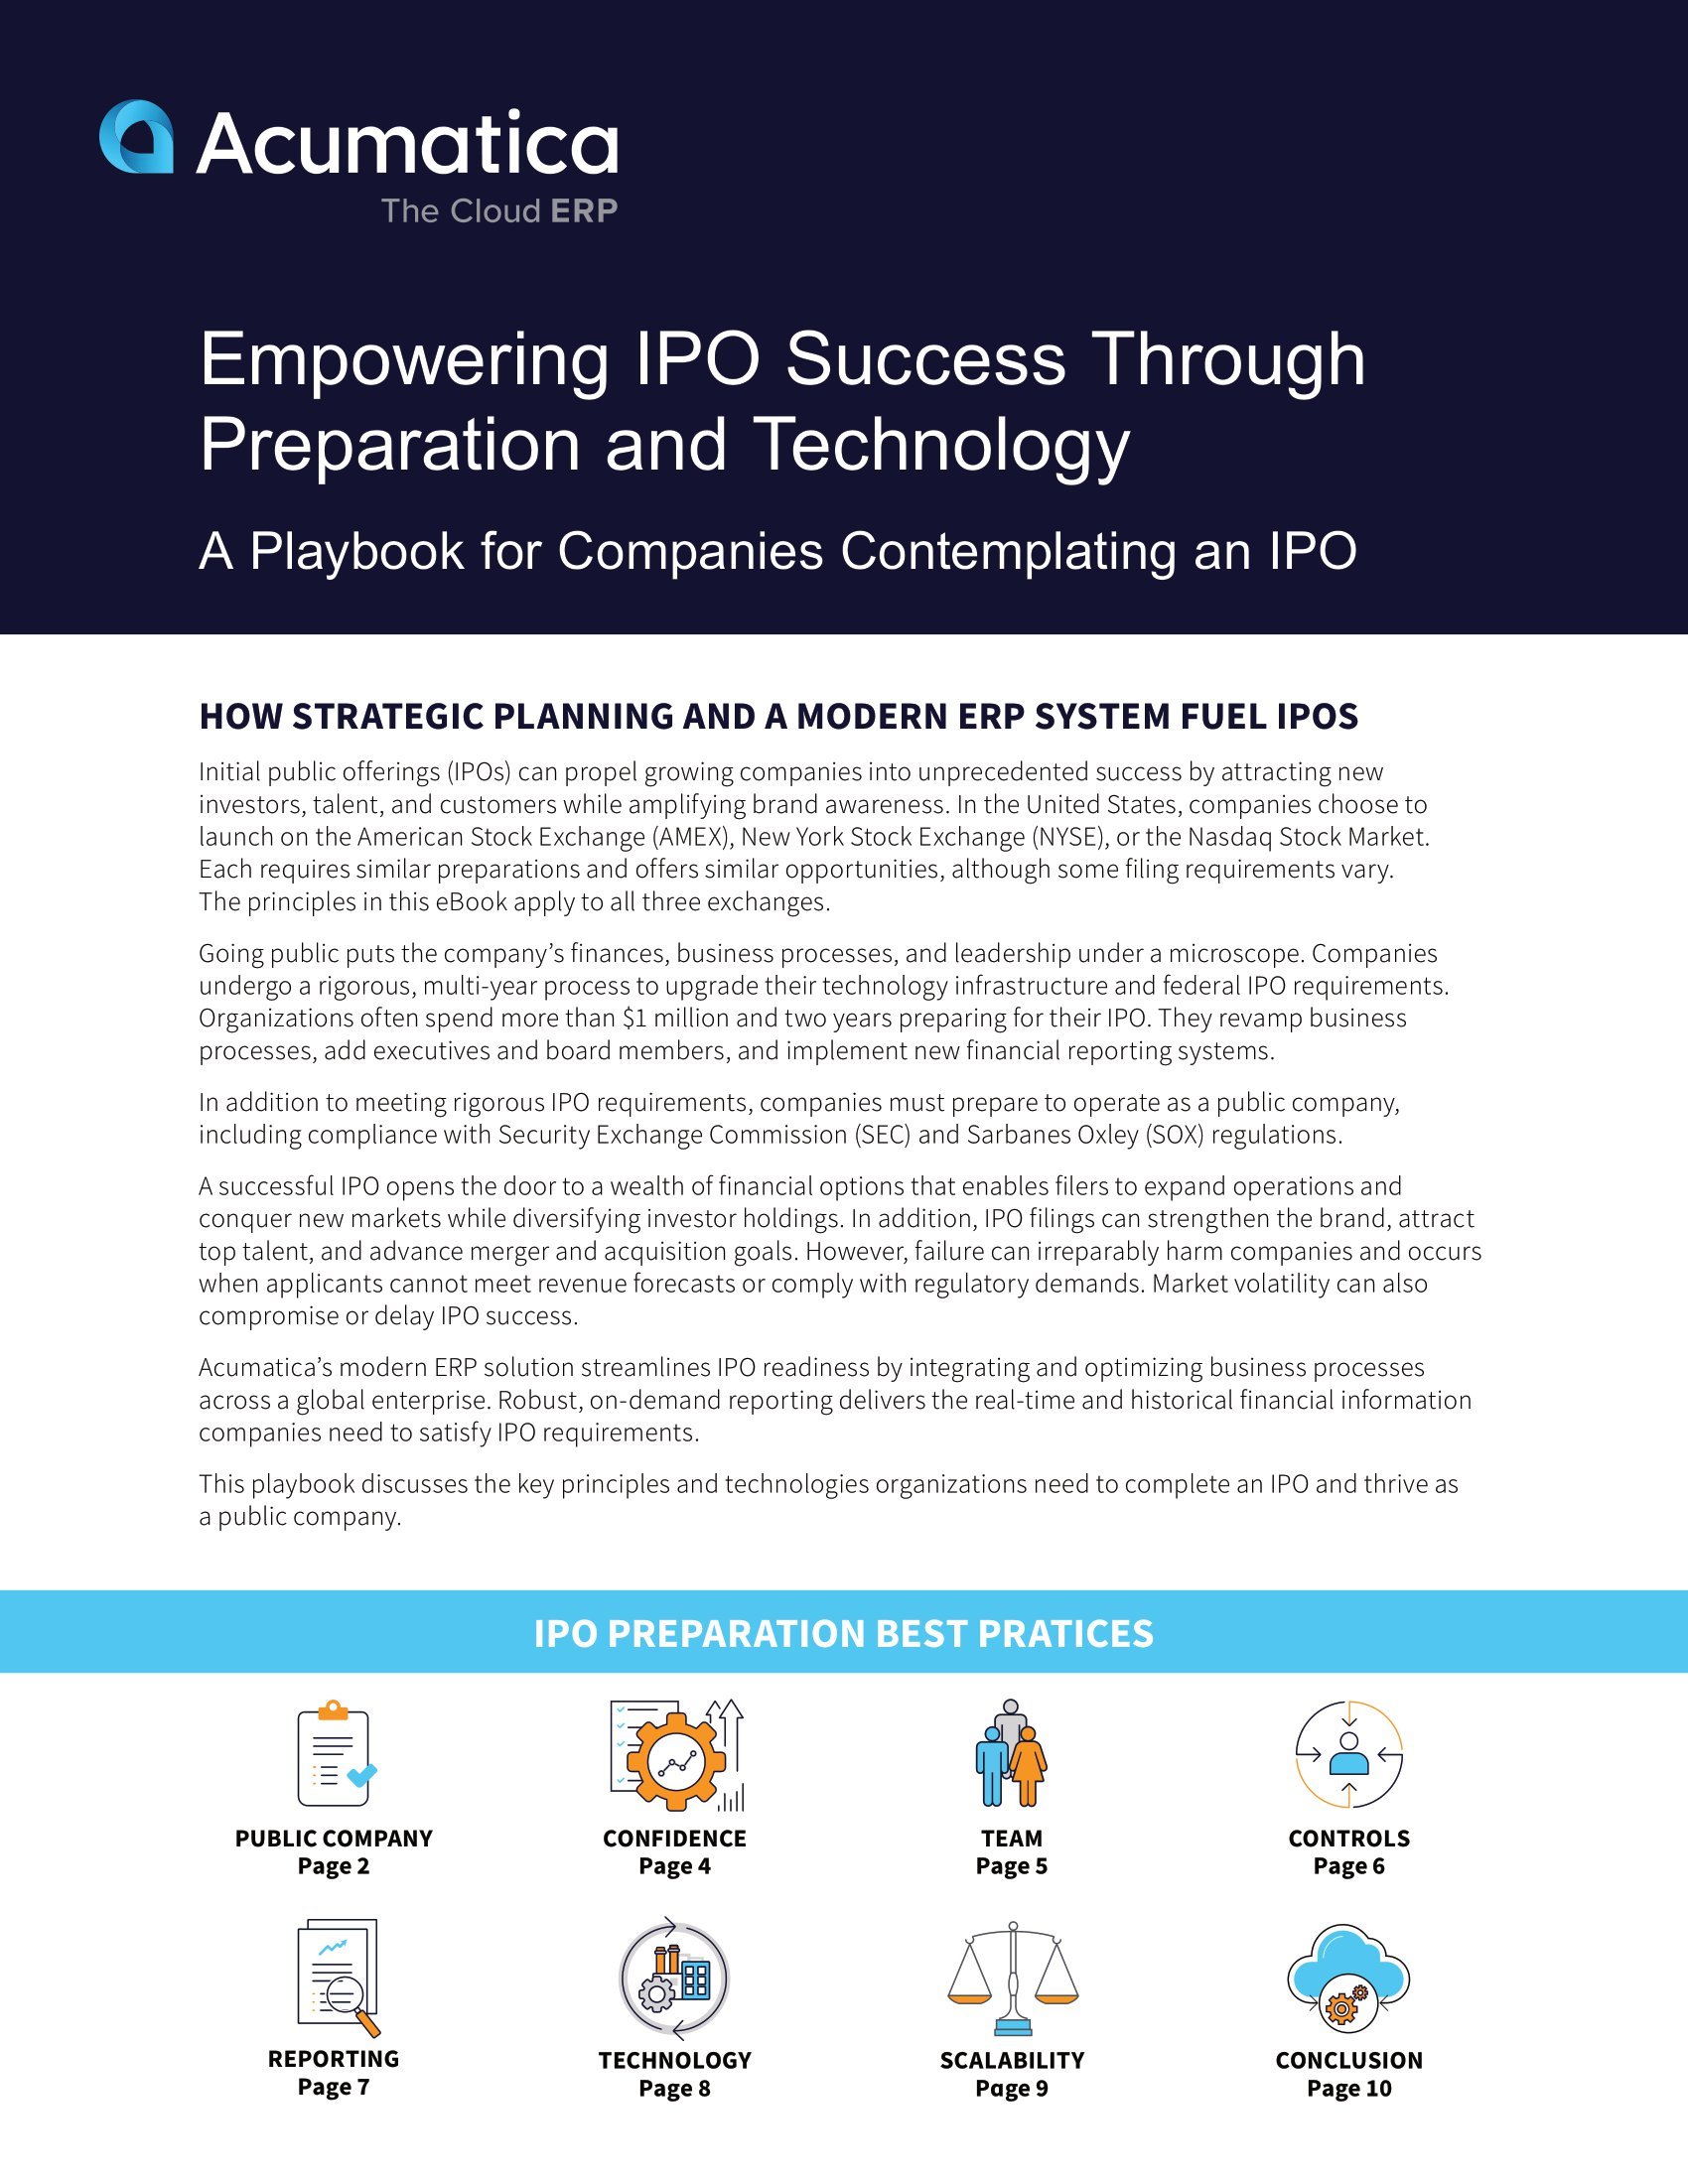 How Strategic Planning and a Modern ERP System Fuel IPO